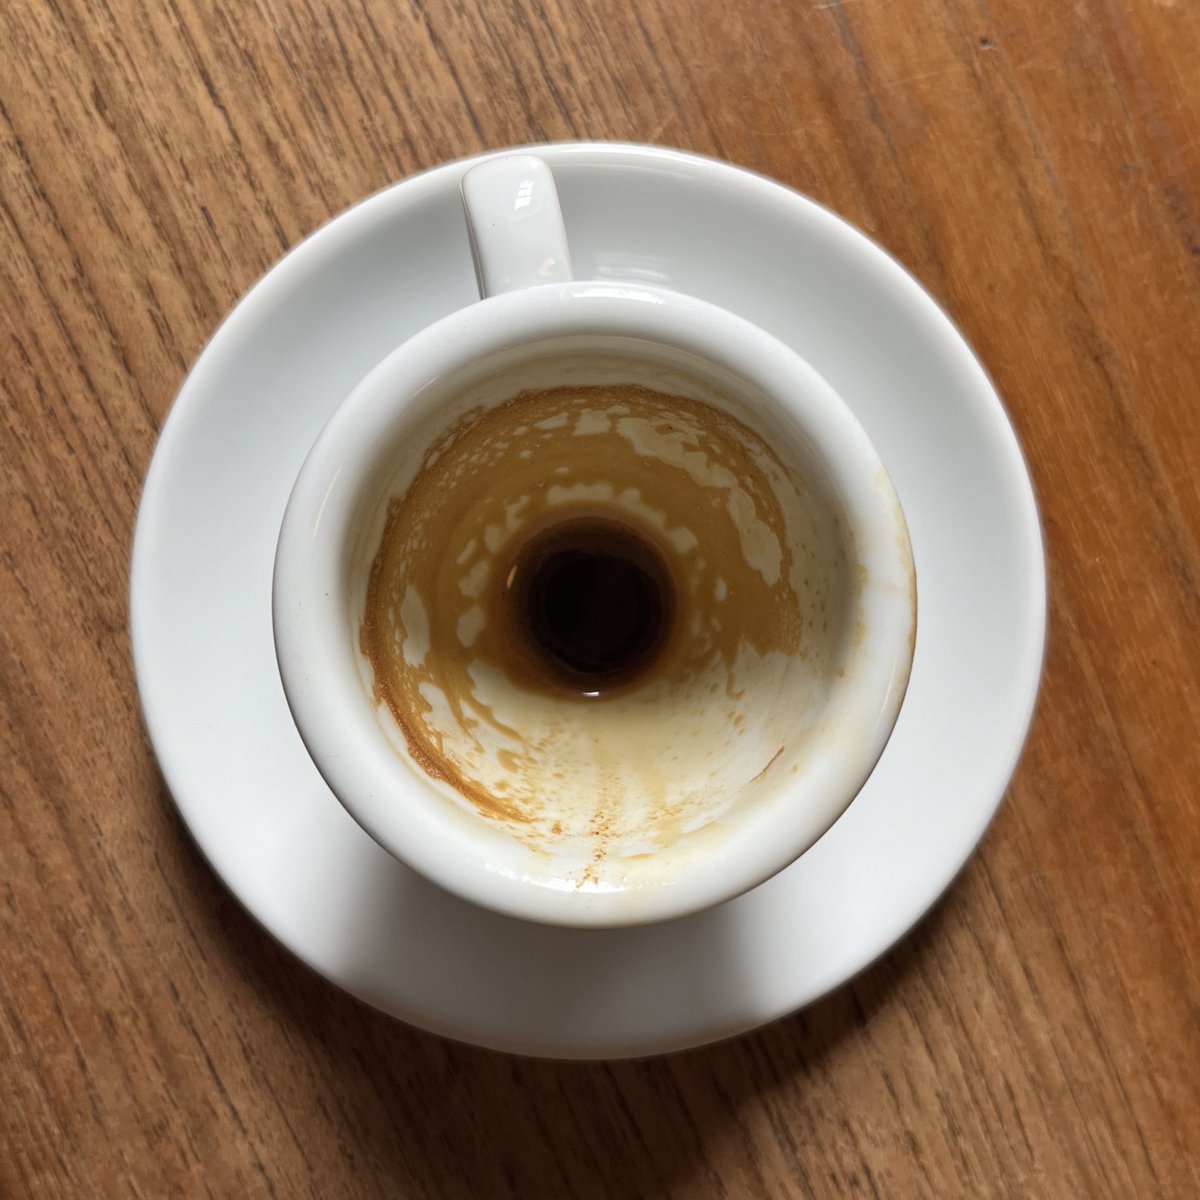 I find hope at the bottom of a double espresso.